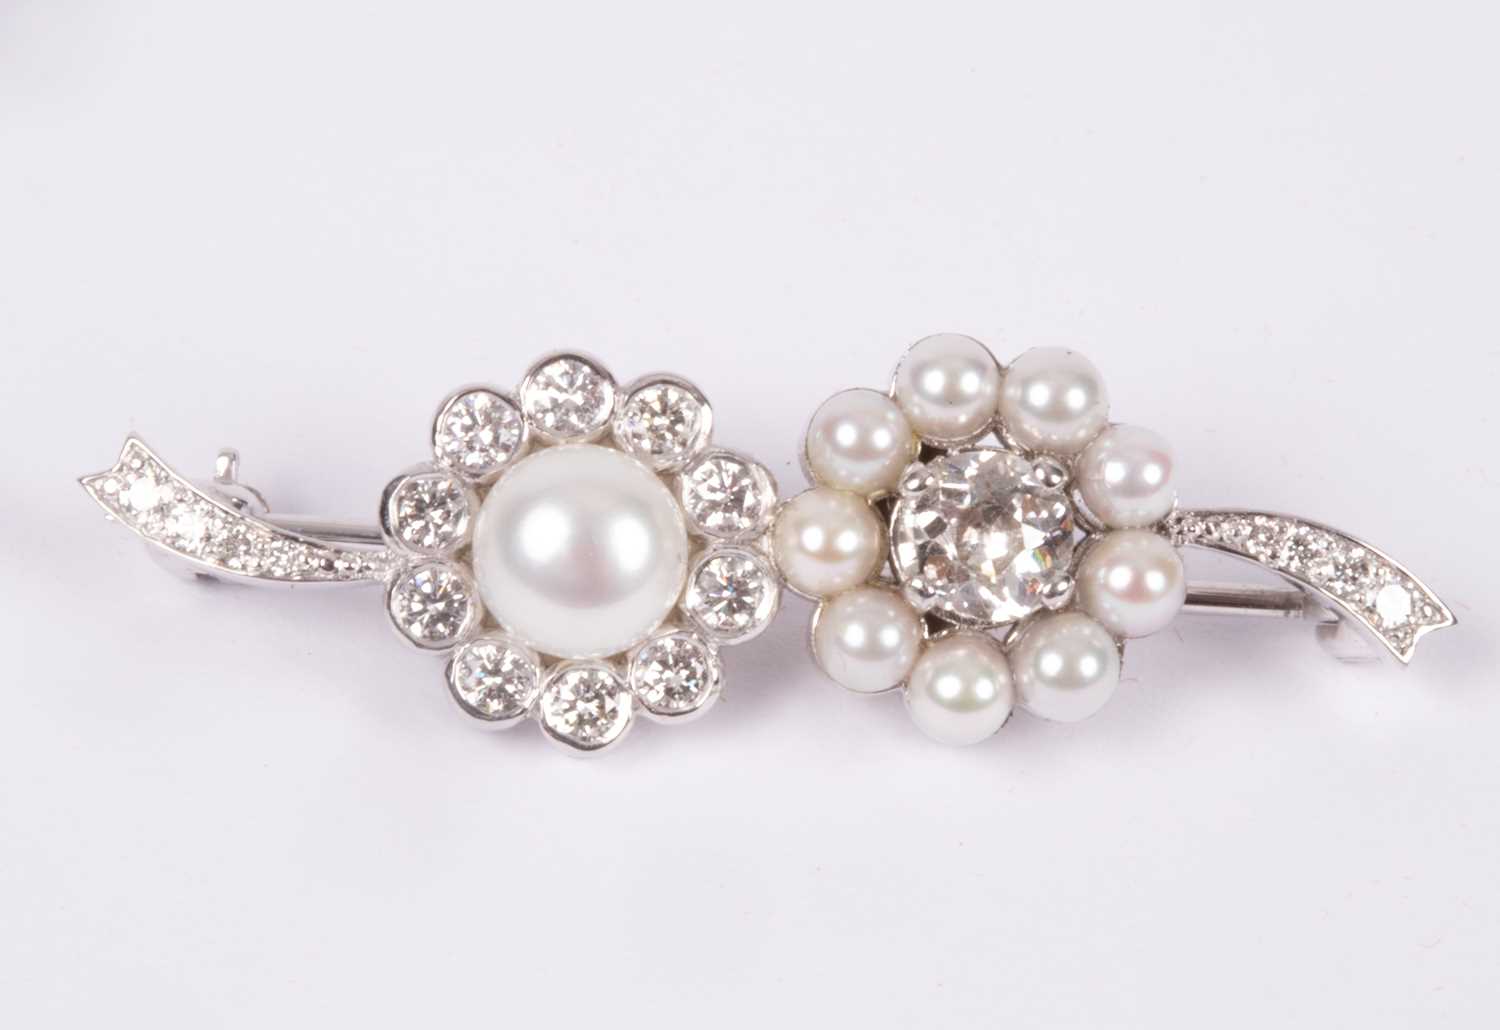 An 18ct white gold diamond and pearl brooch - Image 2 of 3